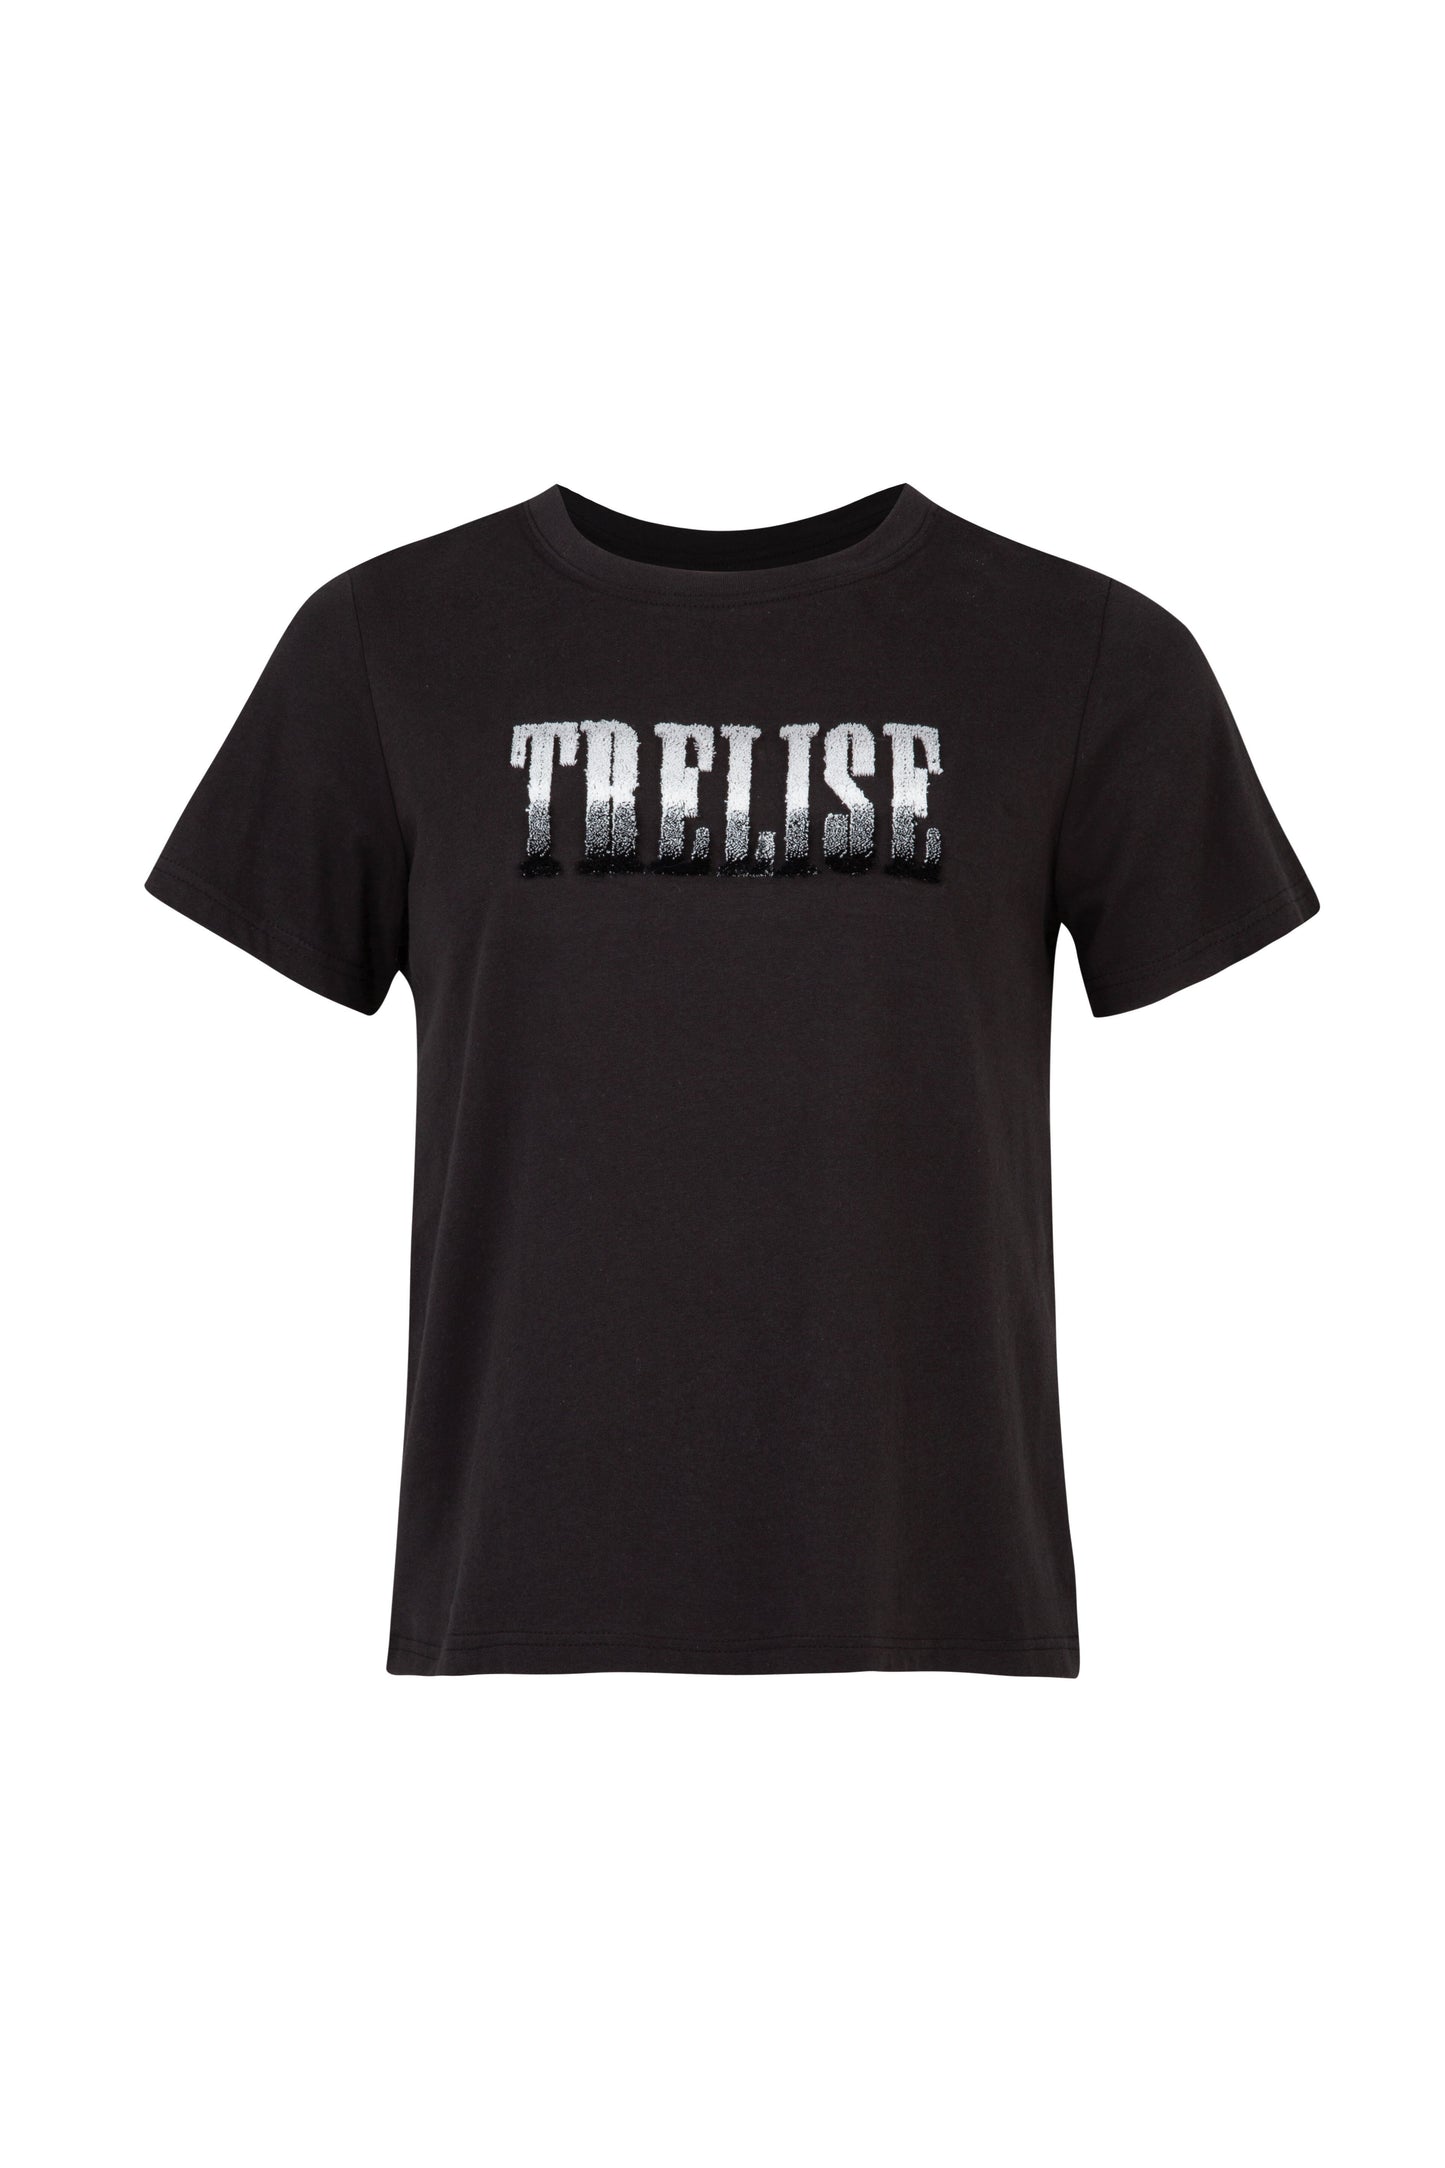 Trelise Cooper - This Must Tee Love T-Shirt